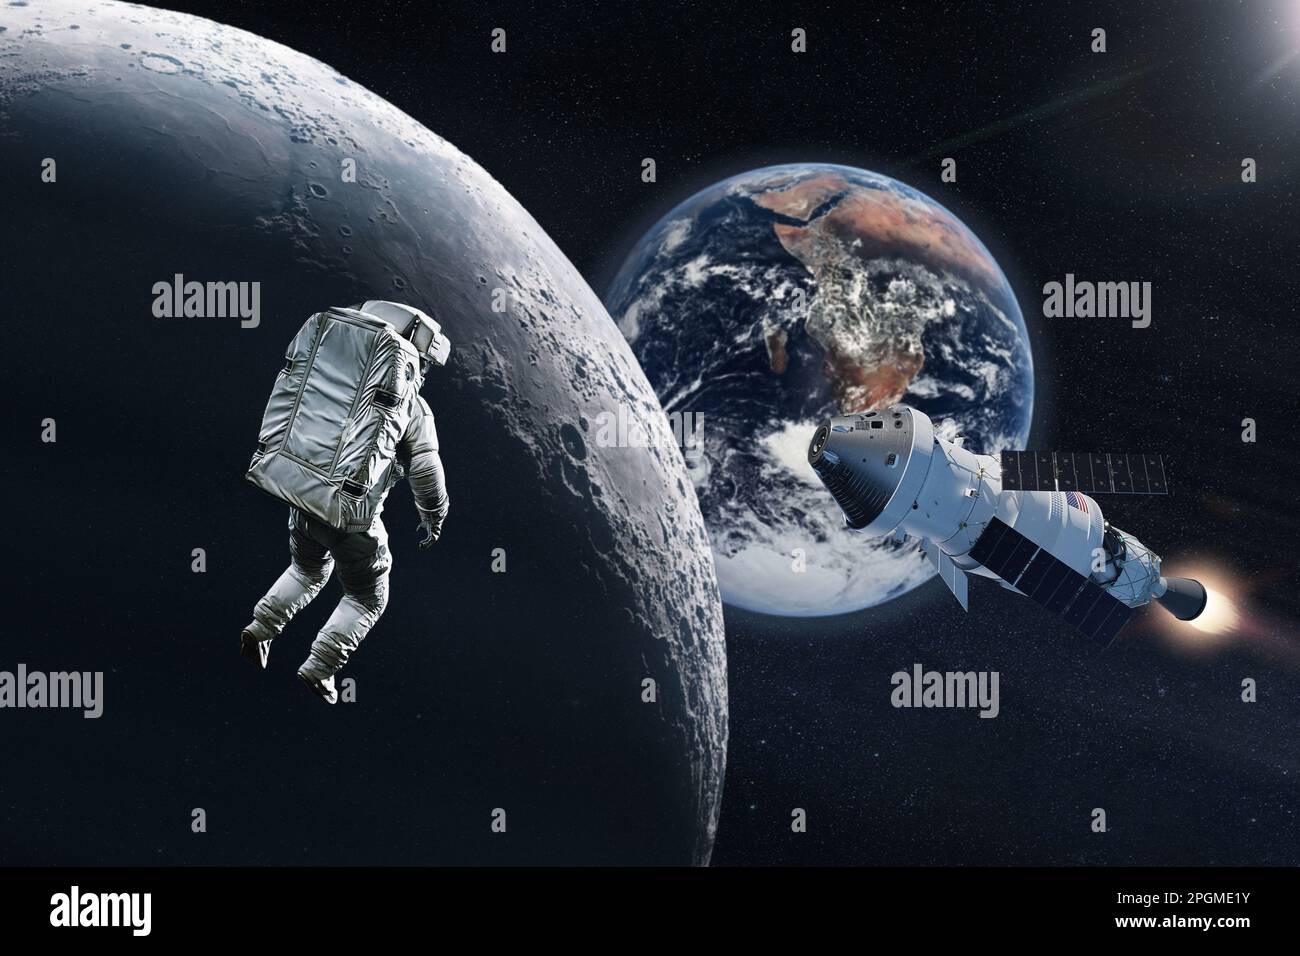 Mission to the Moon. Spaceman and Orion spaceship. Elements of this image furnished by NASA. Stock Photo